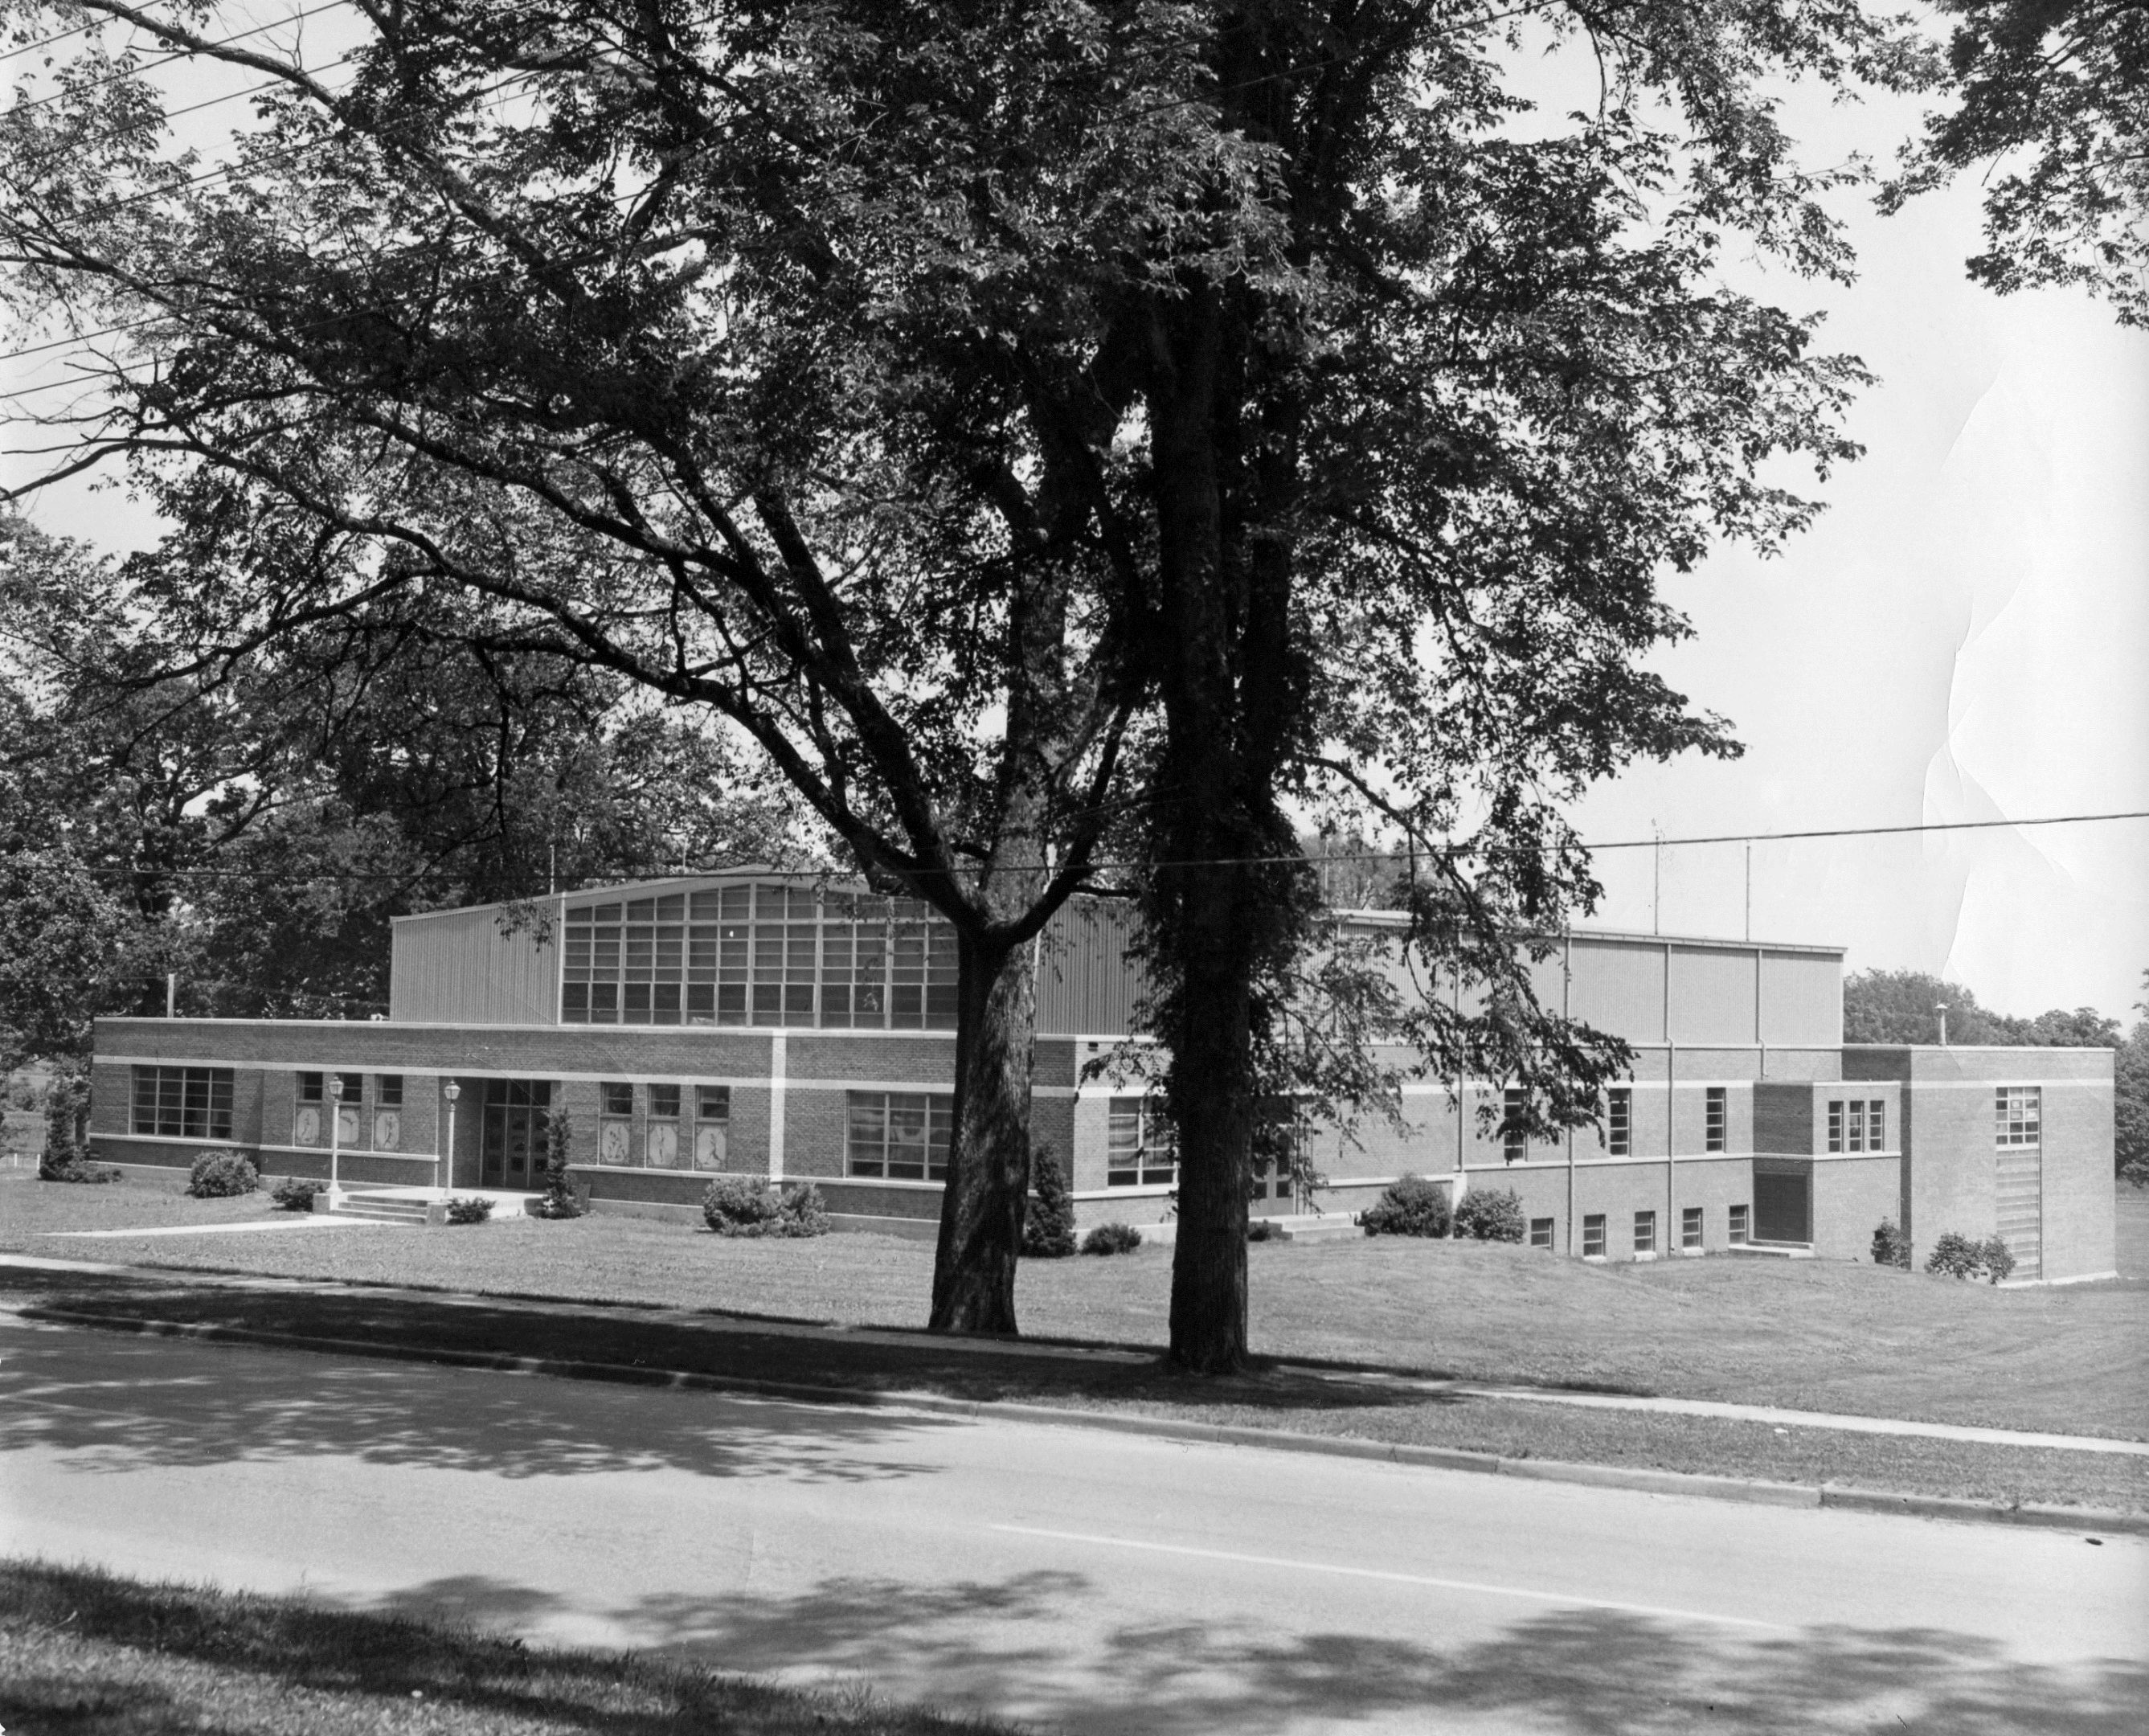 photo of Cornell College field house built in 1953. Note the indoor pool in the rear of the facility. Date @1954